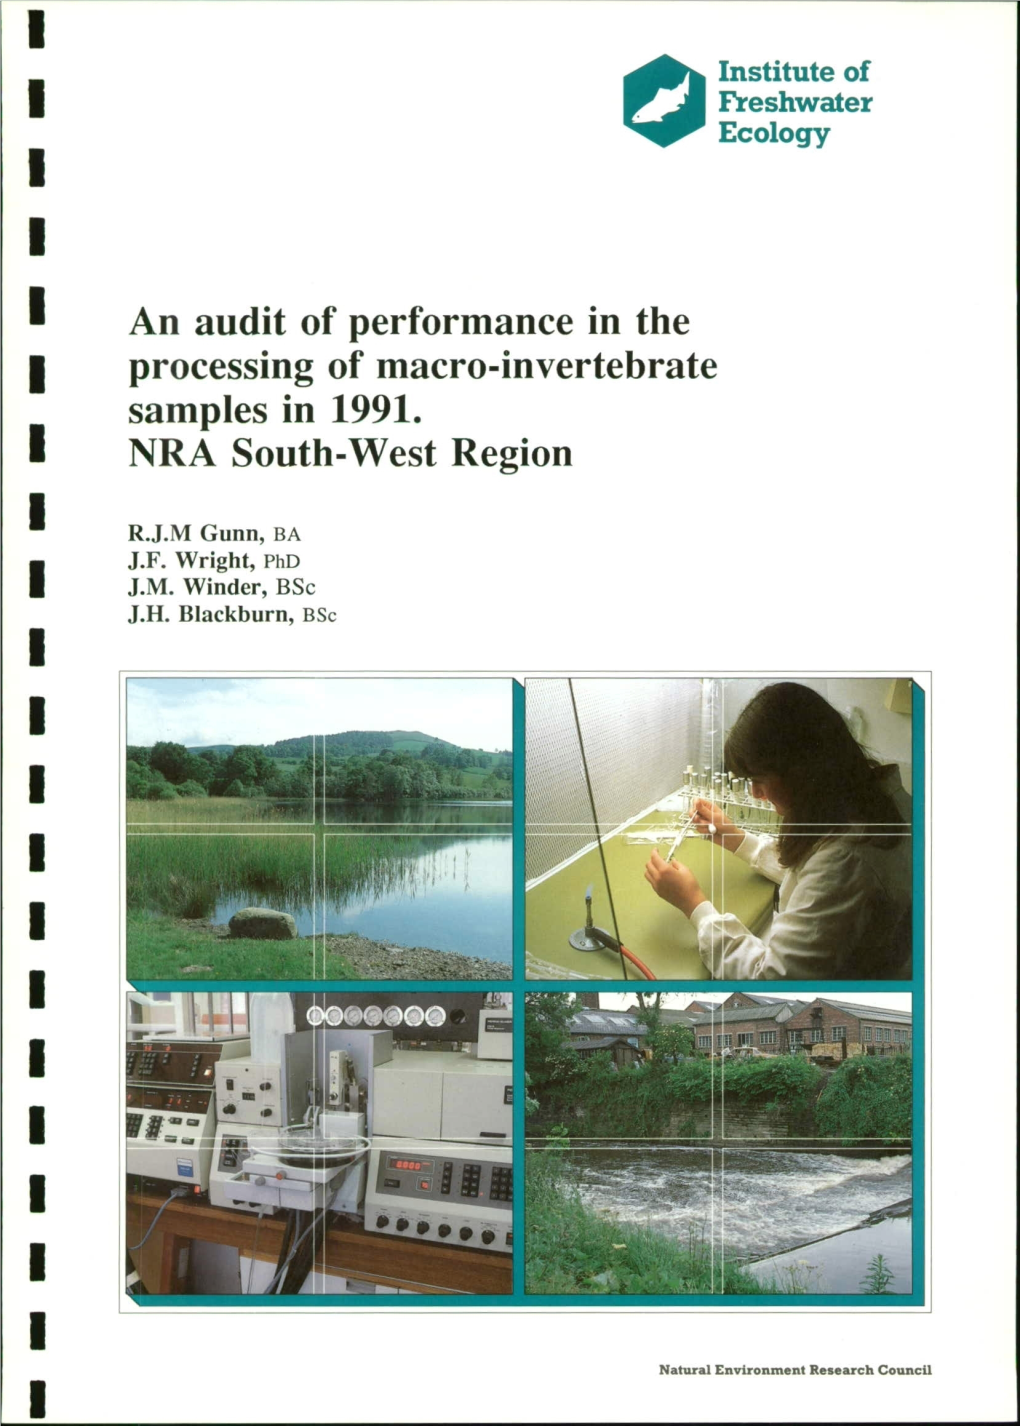 An Audit of Performance in the Processing of Macro-Invertebrate Samples in 1991